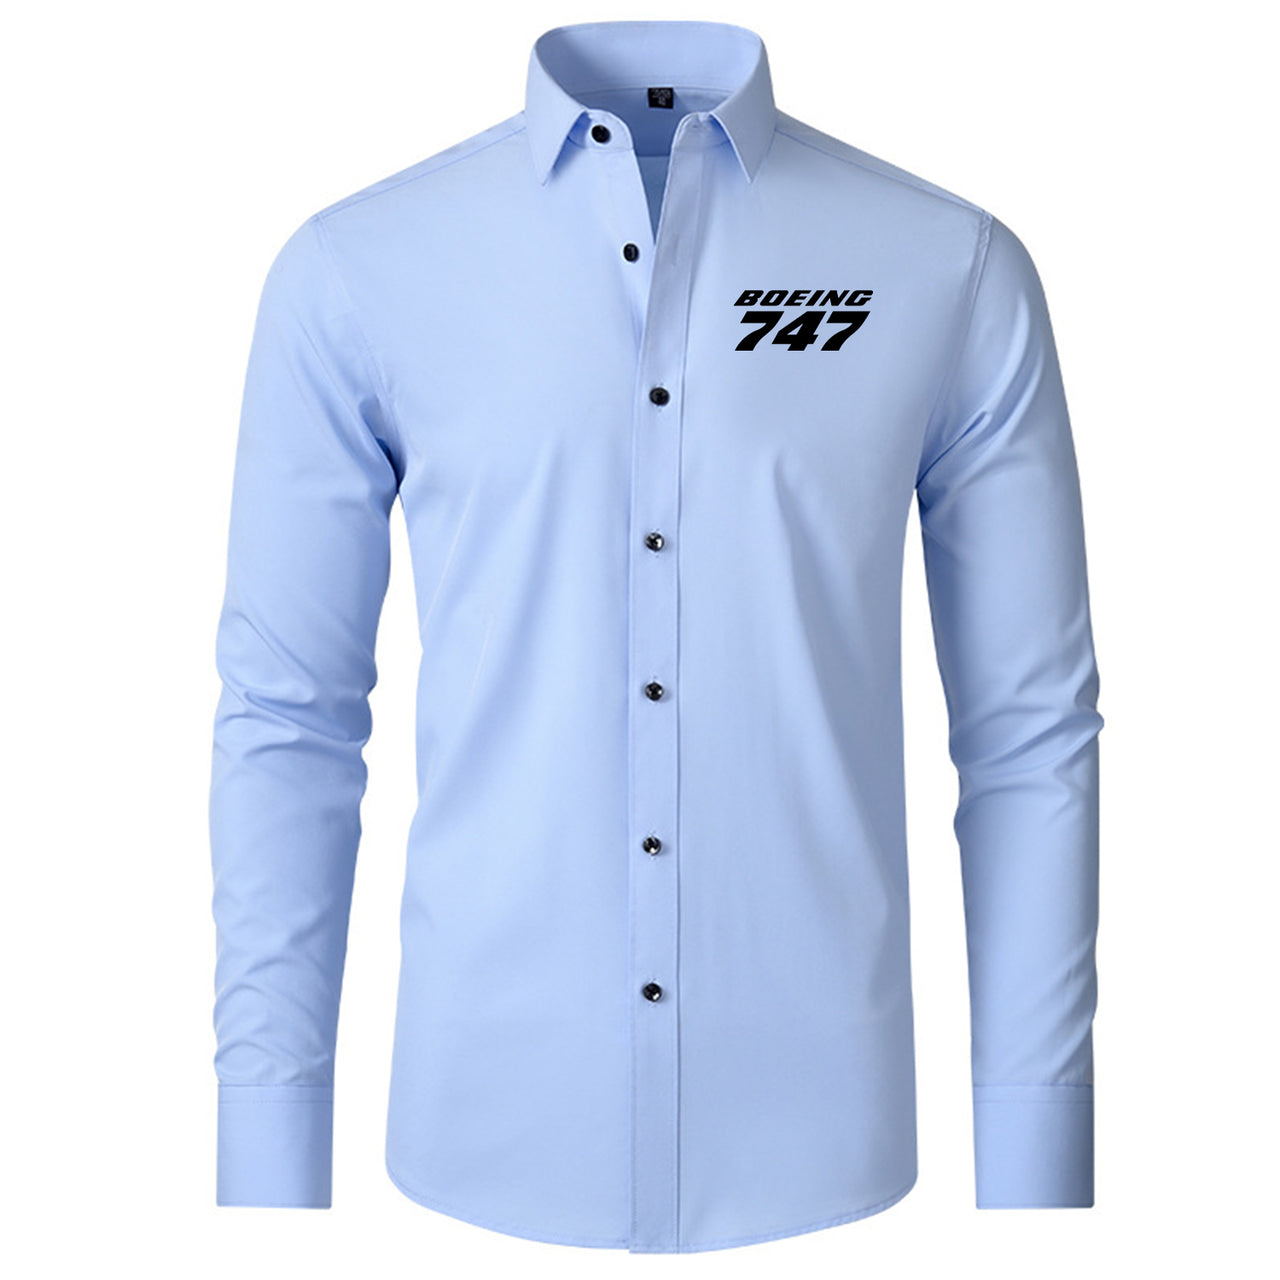 Boeing 747 & Text Designed Long Sleeve Shirts